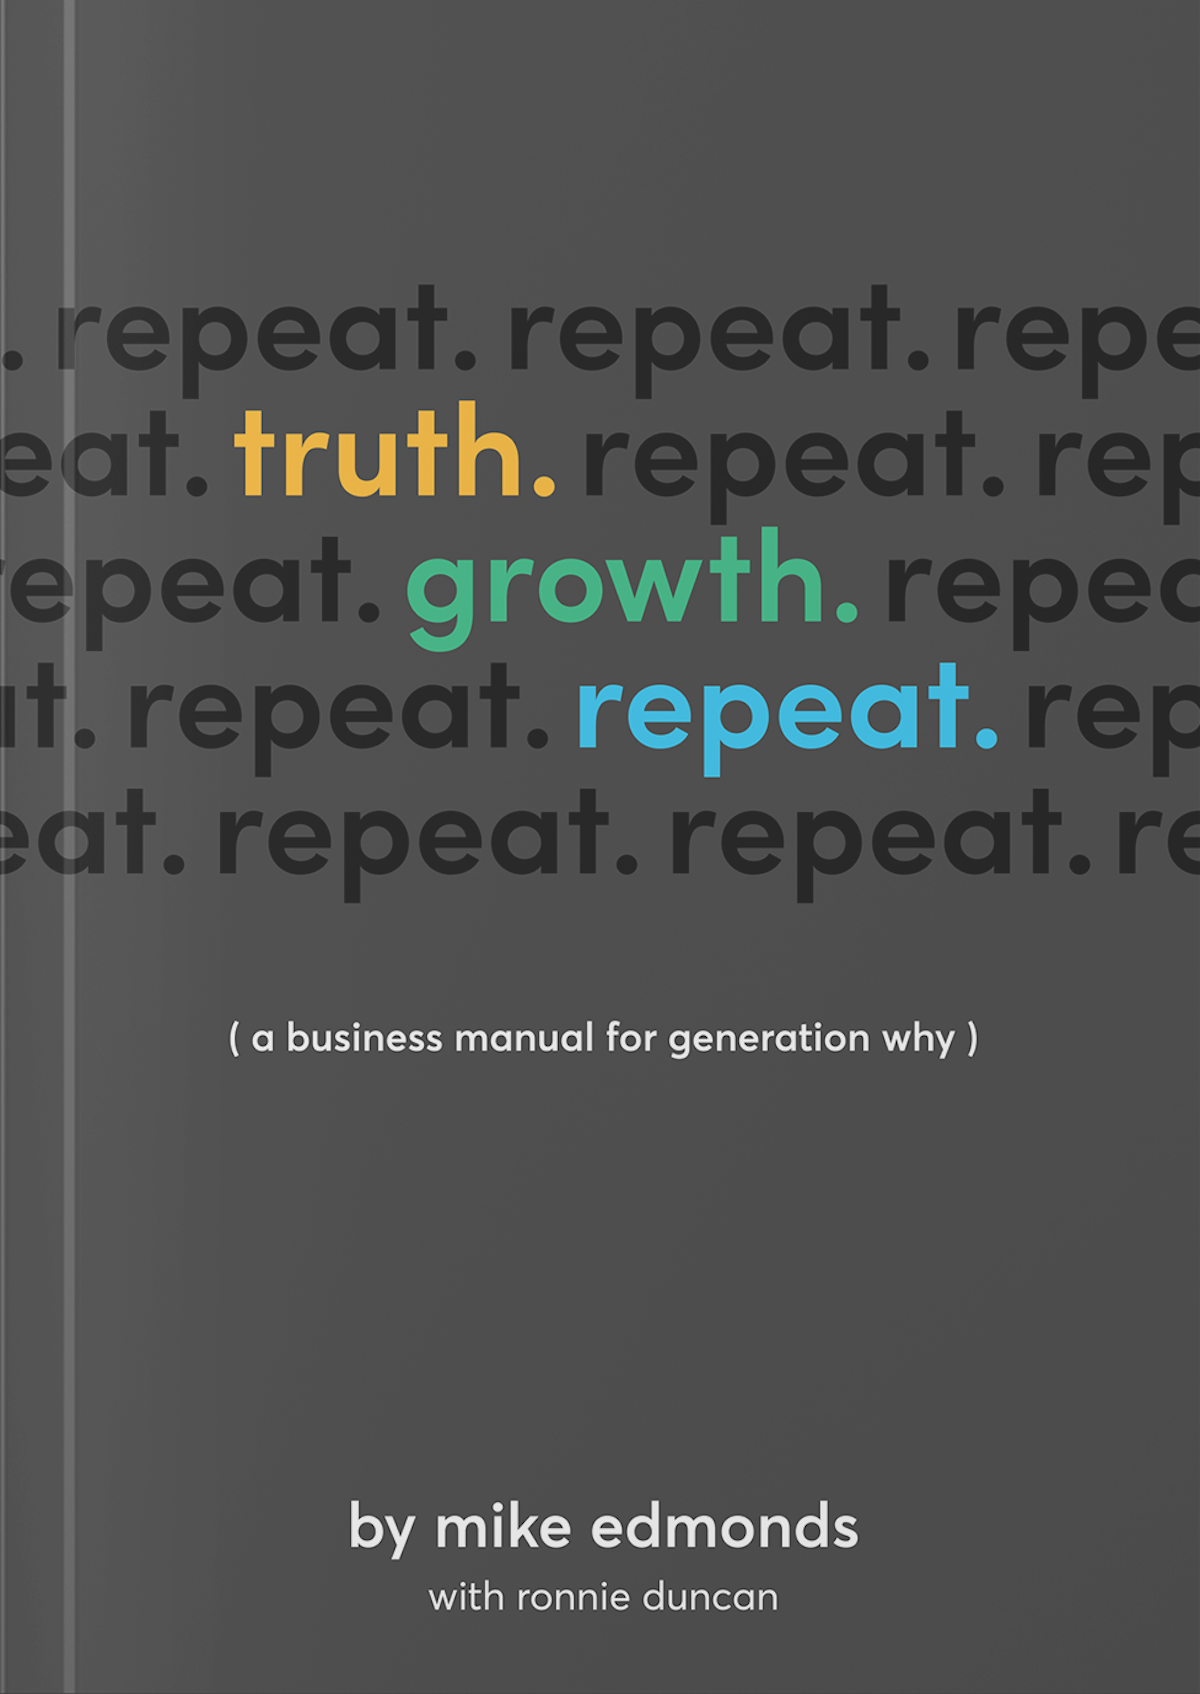 Truth. growth. repeat. a business manual for generation why